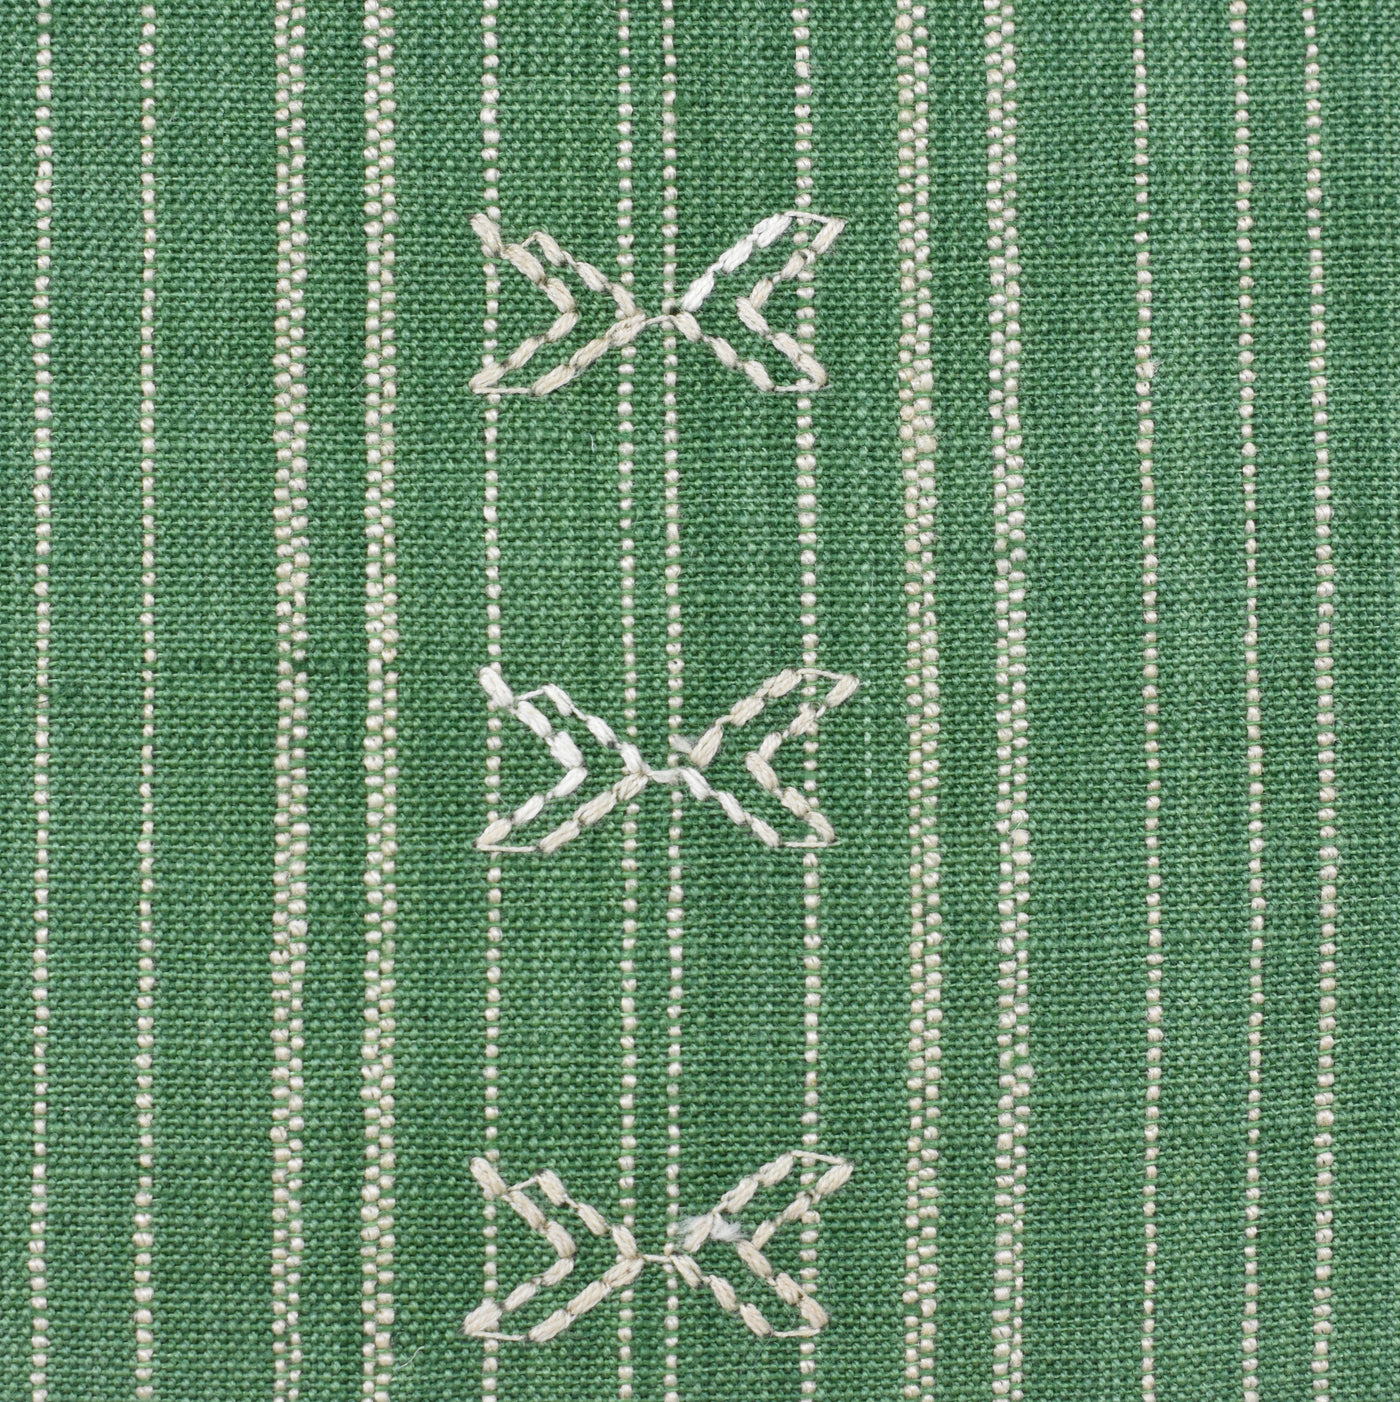 Green Embroidered Cushion